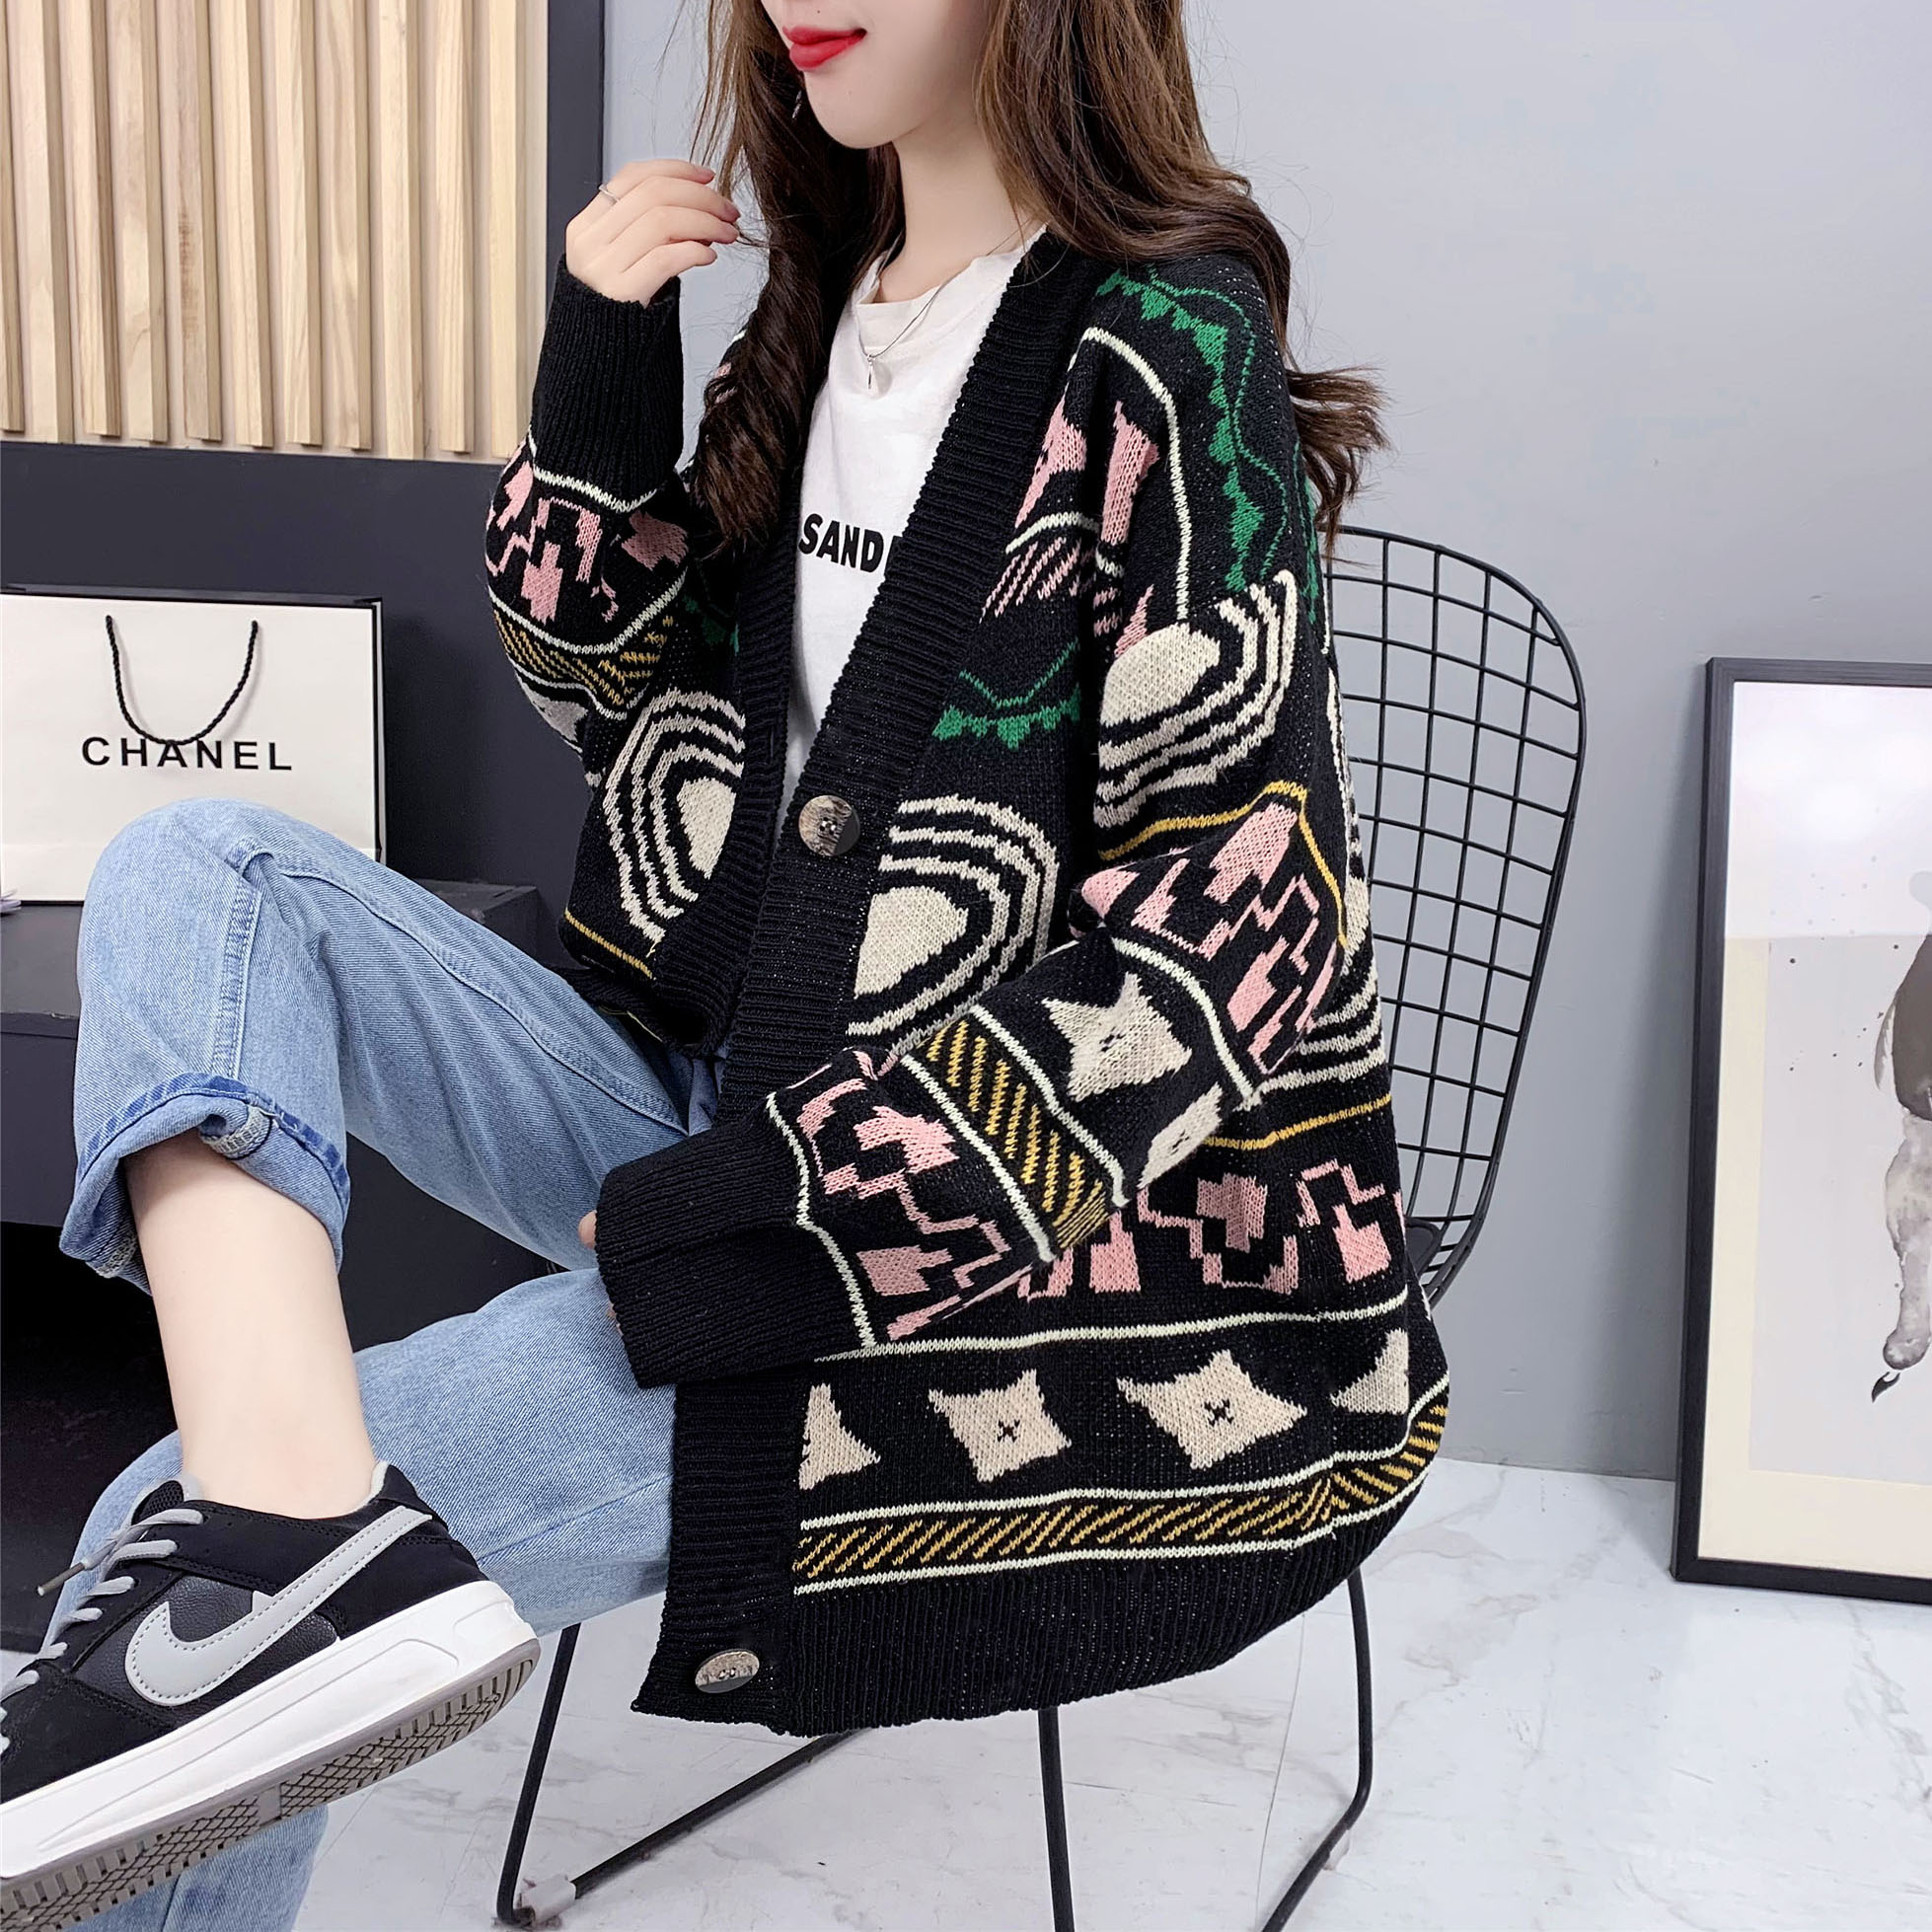 Retro jacquard knitted cardigan women's spring new style lazy sweater jacket spring and autumn loose outer wear trend